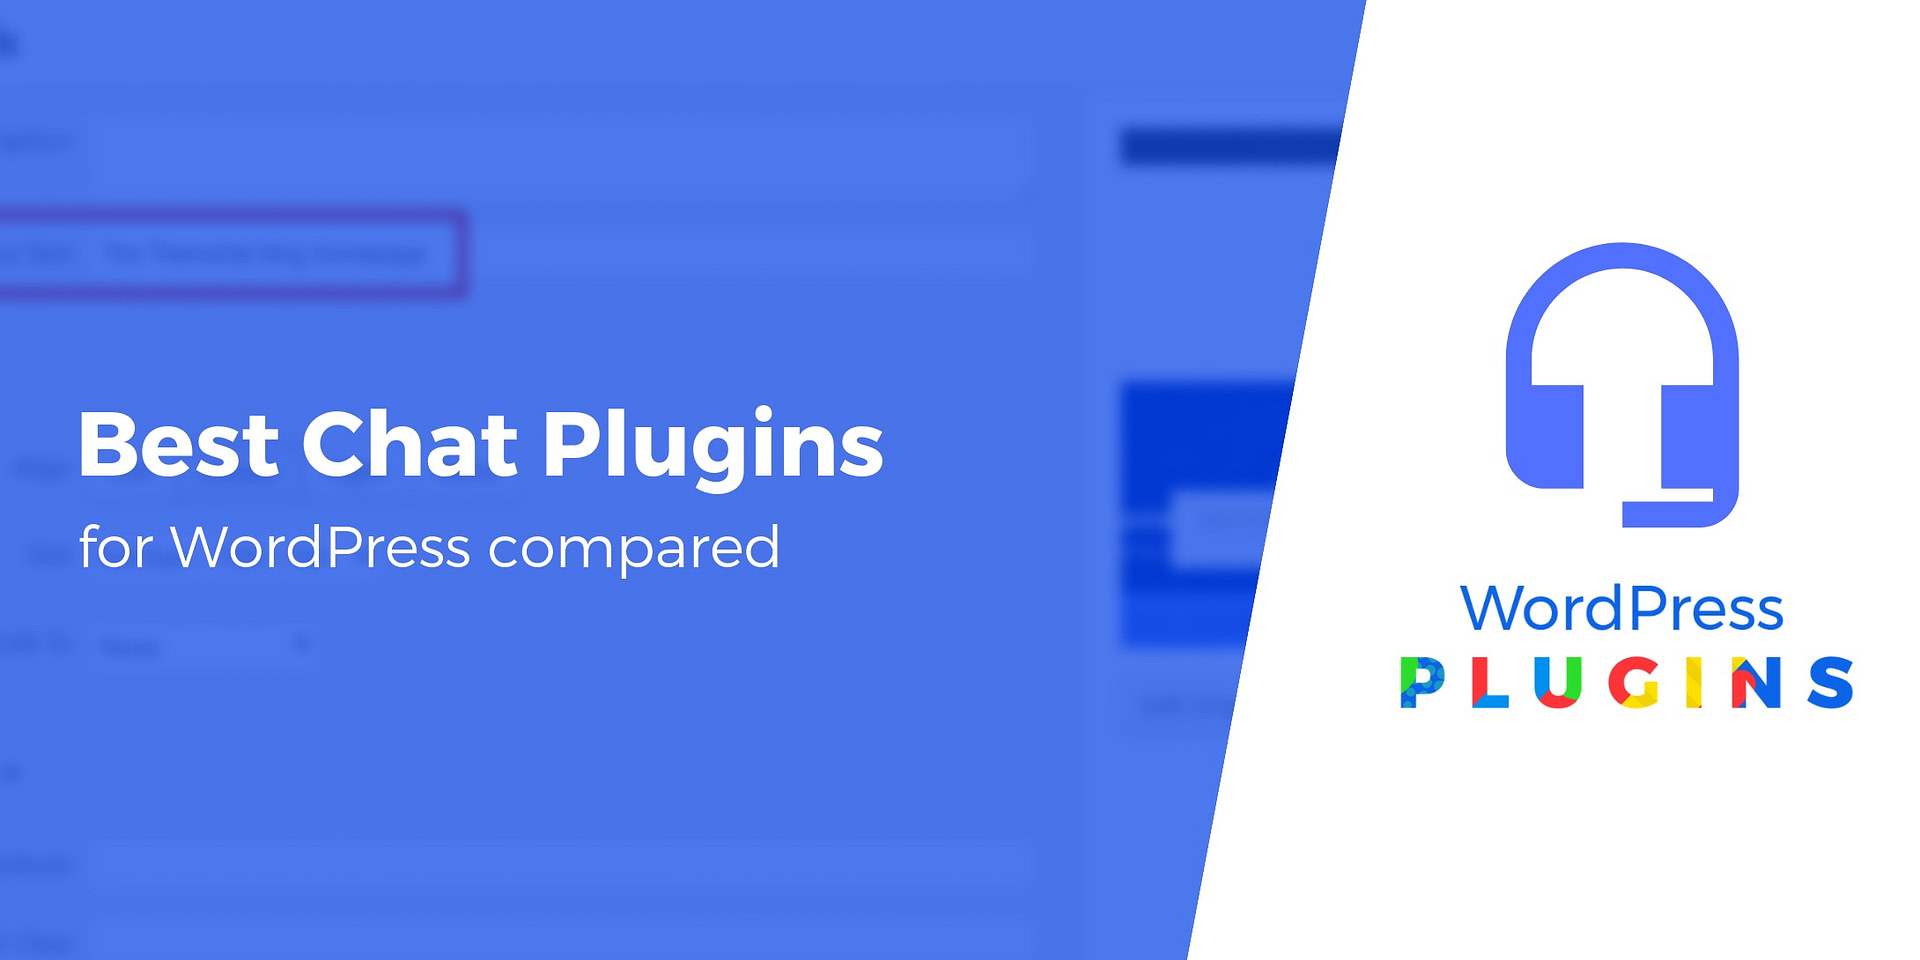 Top 10 WordPress Plugins: Boost Your Website's Power and Performance